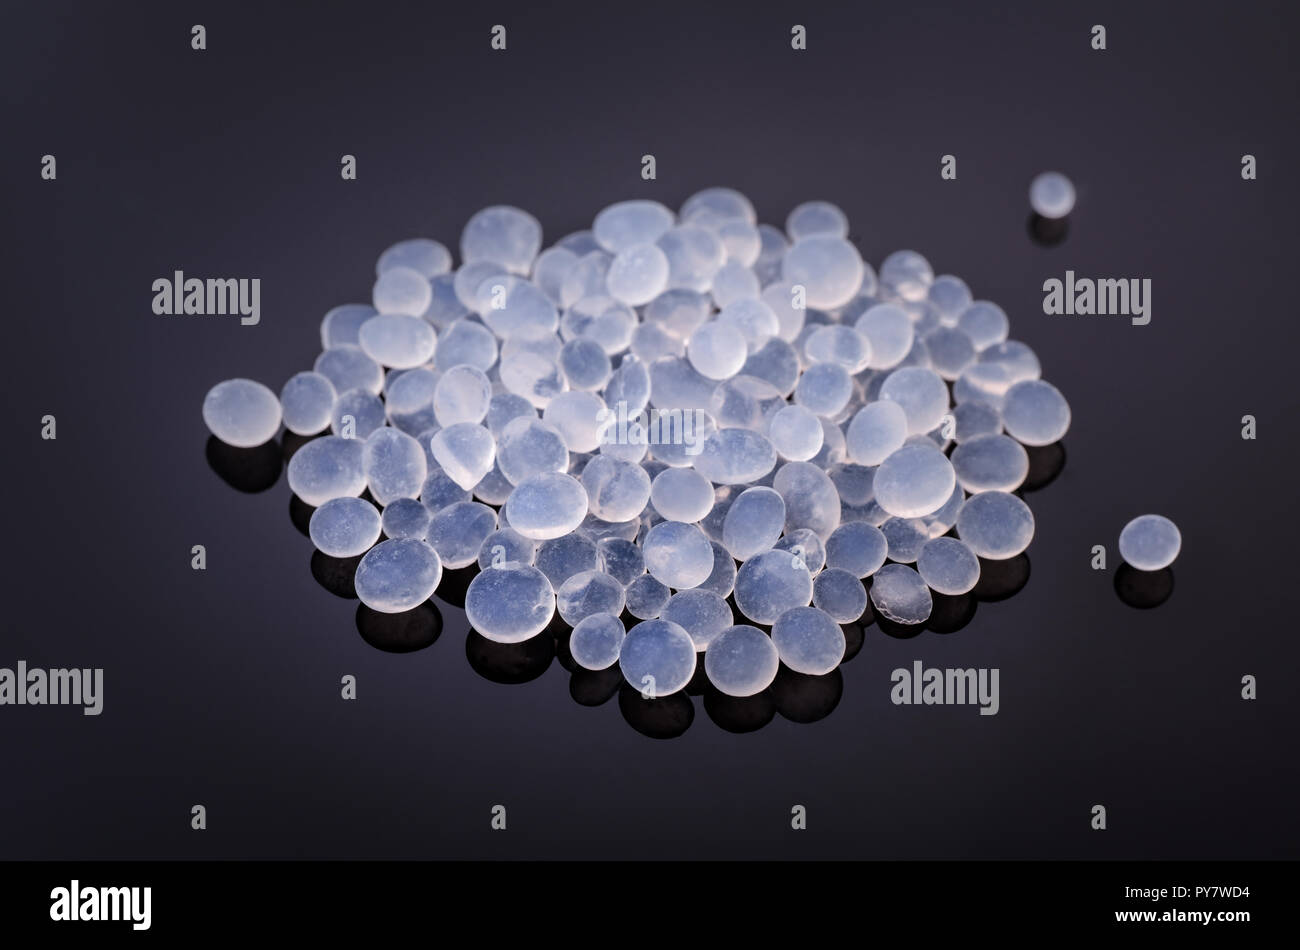 Pile of silica gel granules on black background Stock Photo